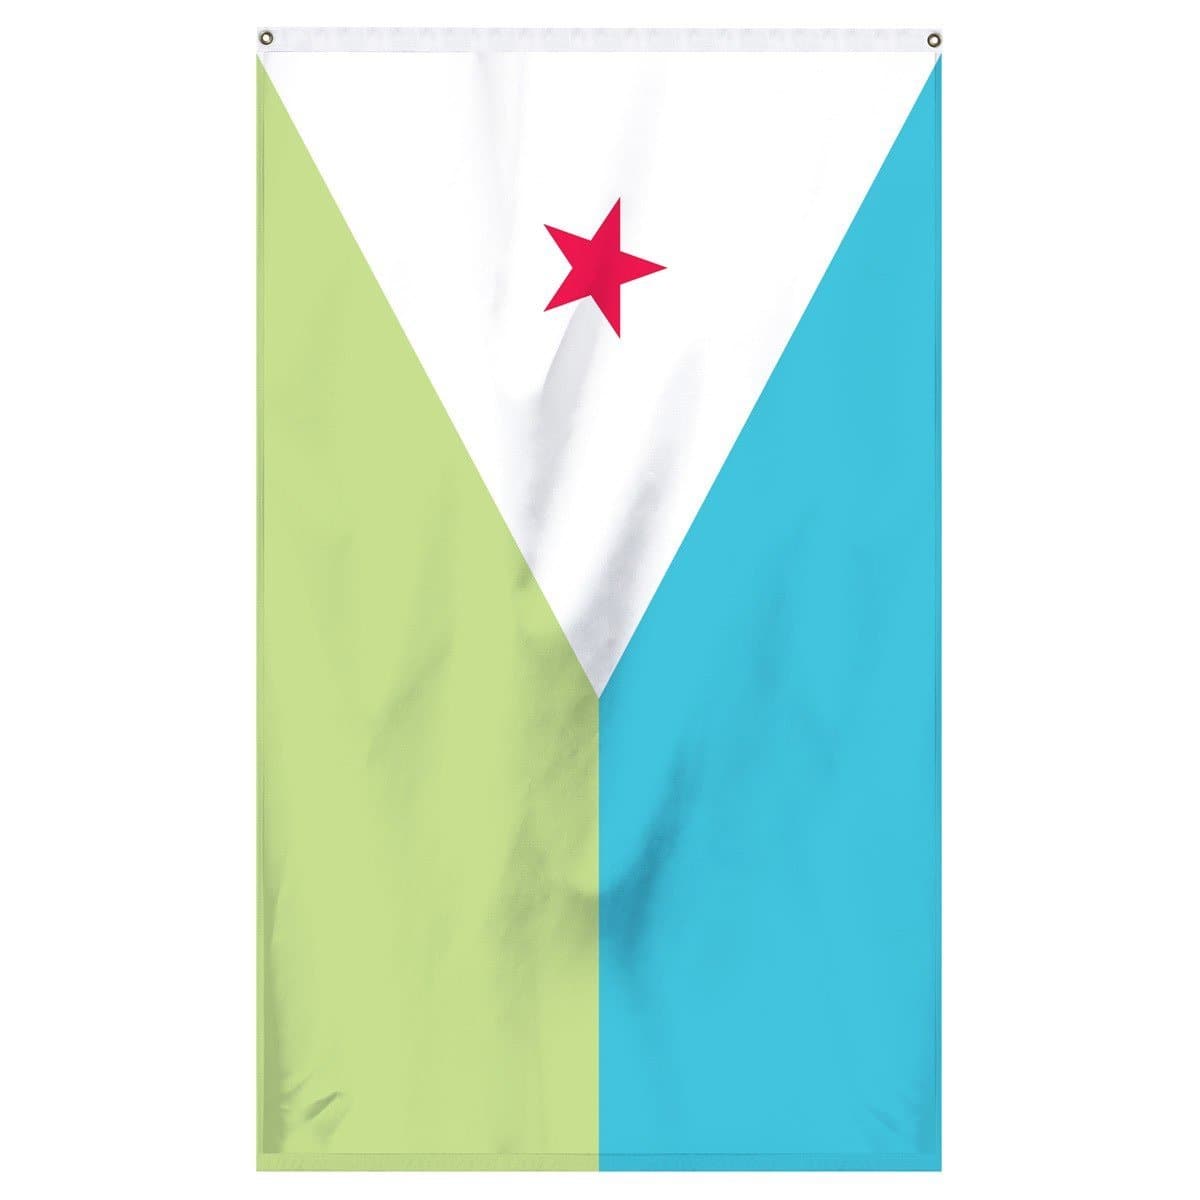 The national flag of Djibouti for sale for flagpoles, parades, and collectors